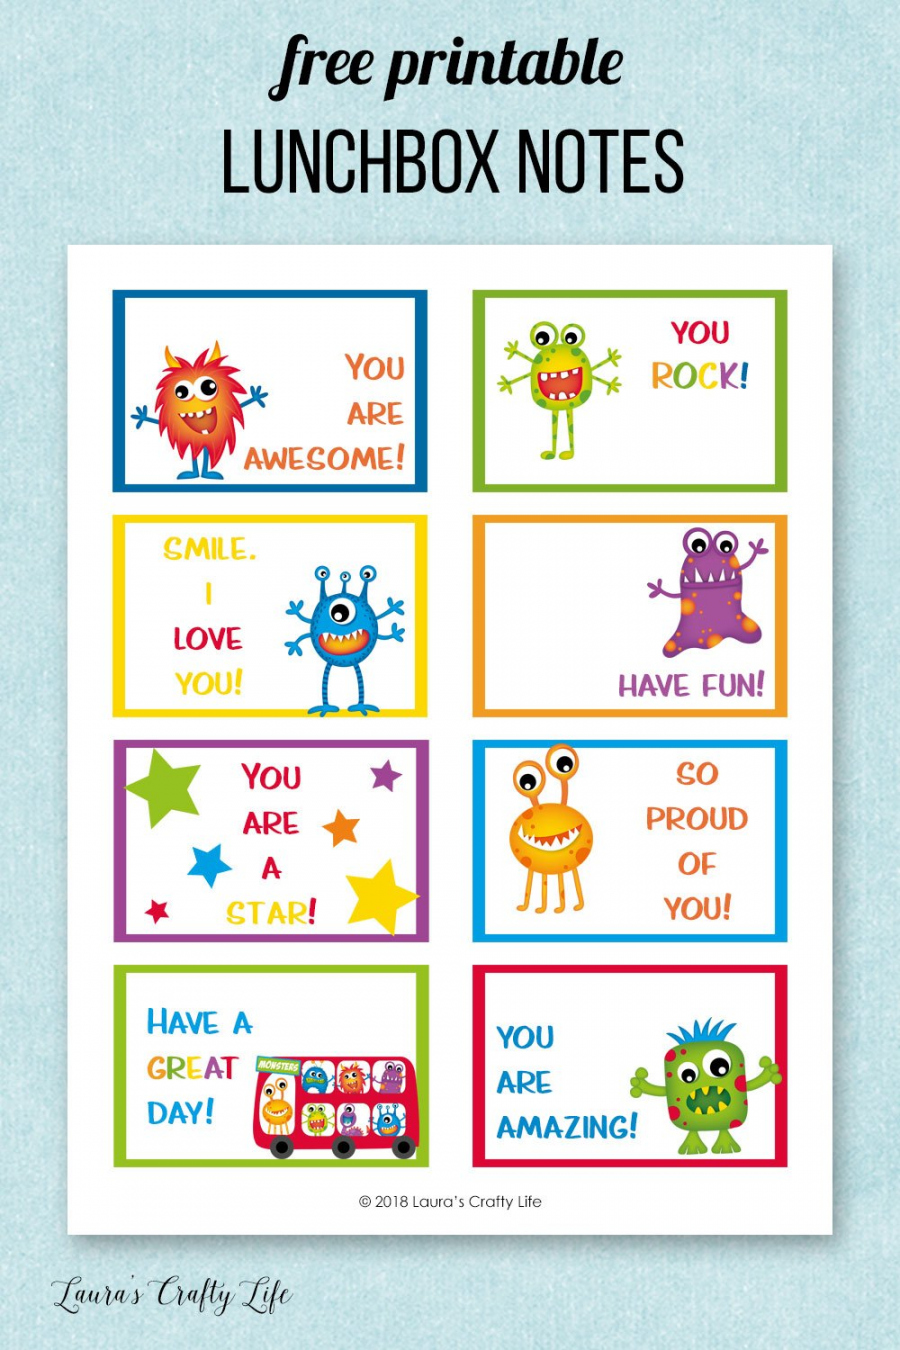 Printable Lunchbox Notes - FREE Printables - Free Printable Lunchbox Notes